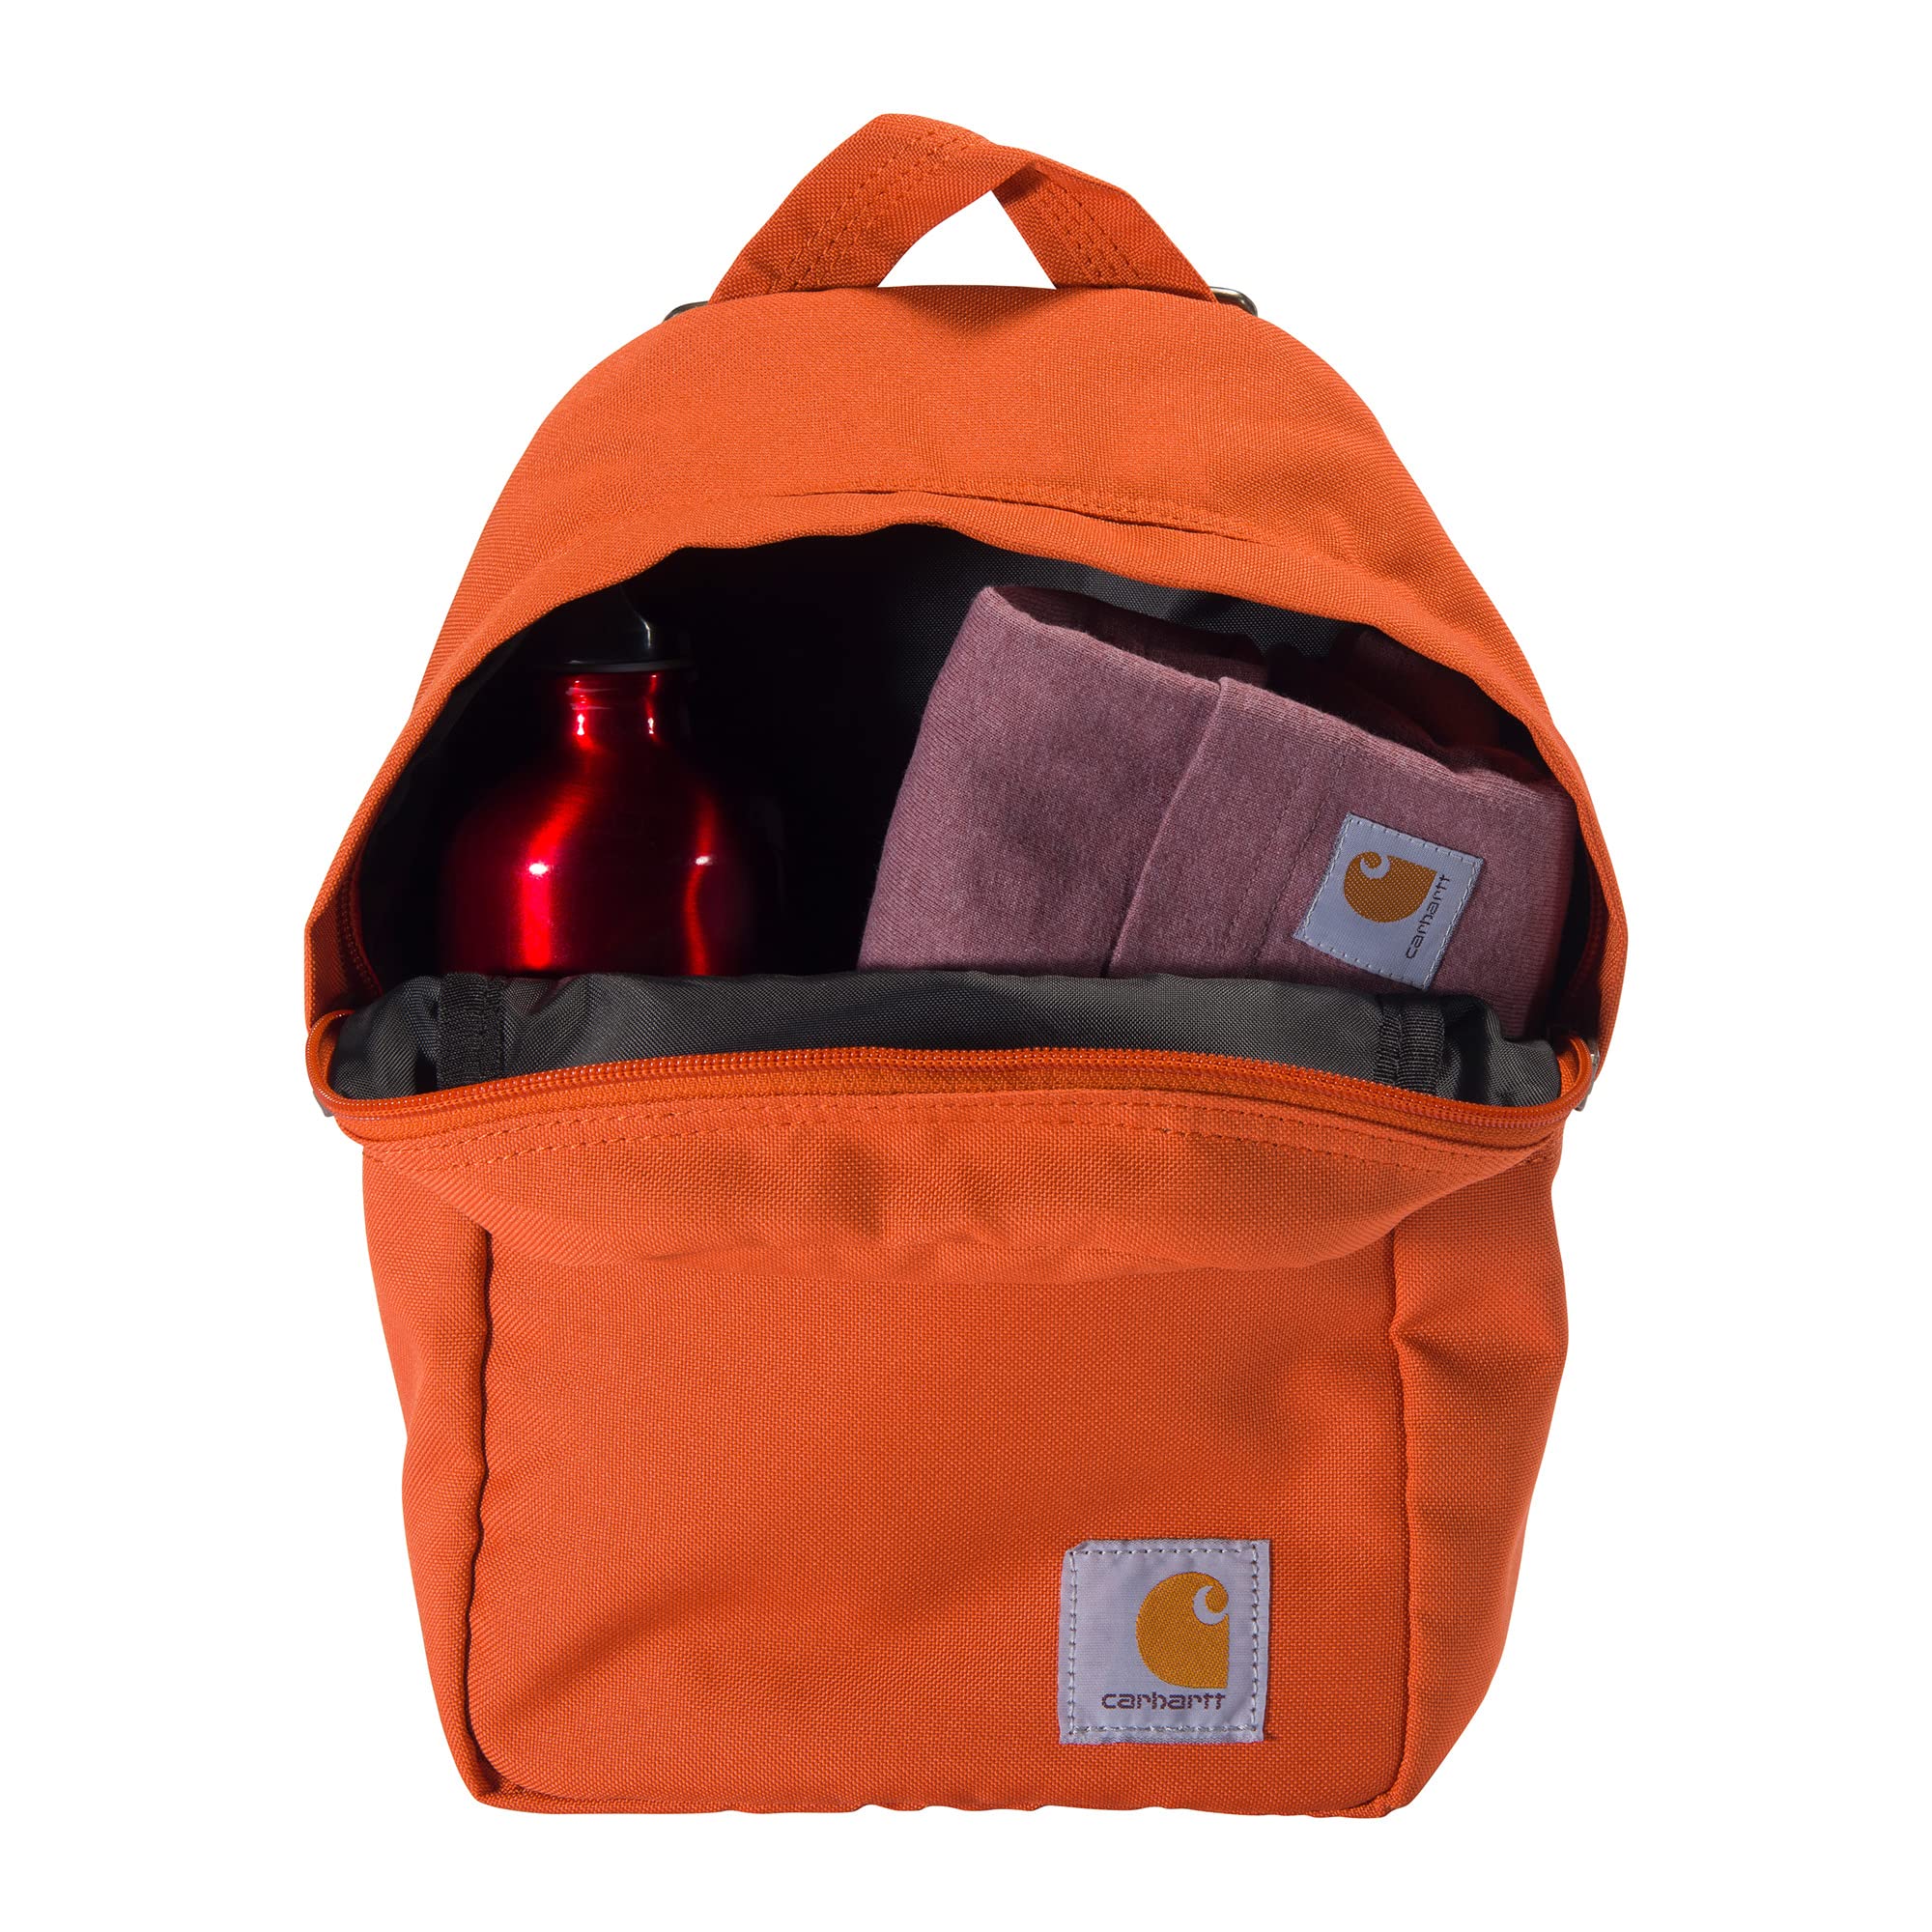 Carhartt Classic Mini, Durable, Water-Resistant Backpack with Adjustable Shoulder Straps, Sunstone, One Size